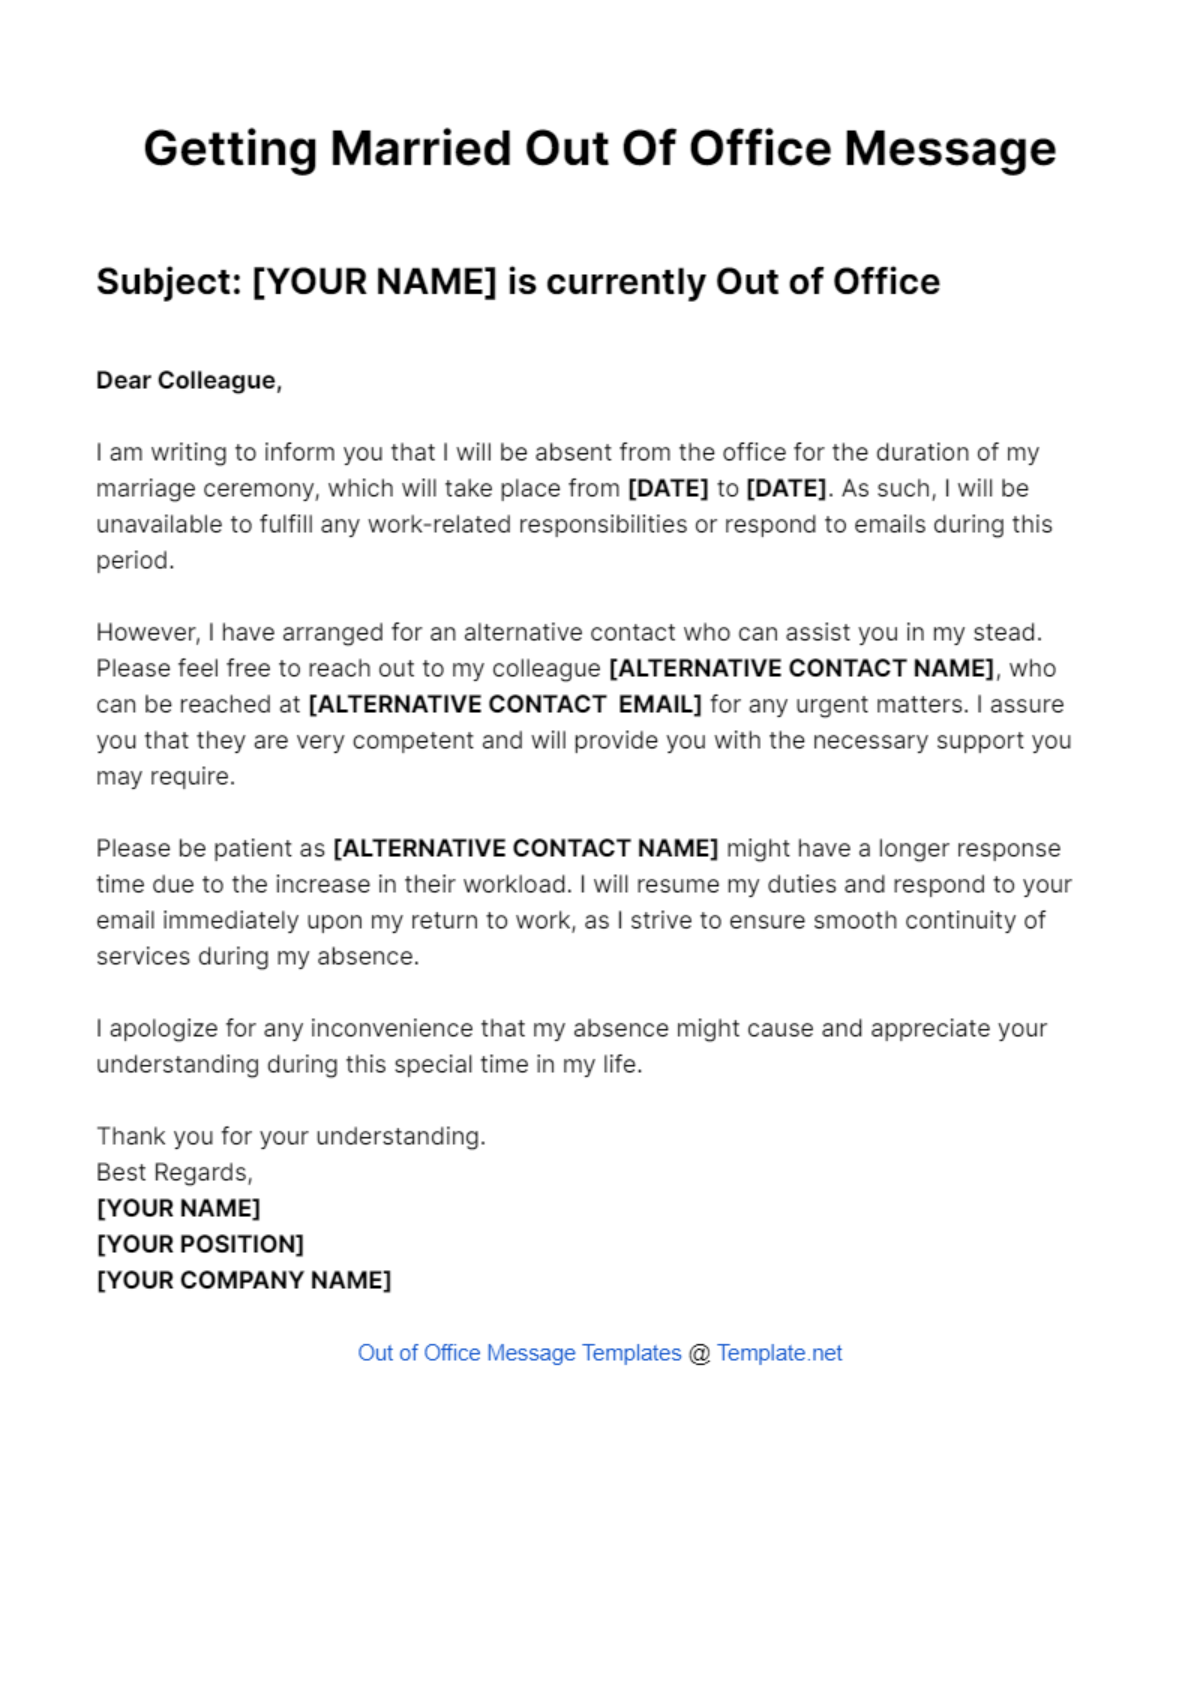 Getting Married Out Of Office Message Template